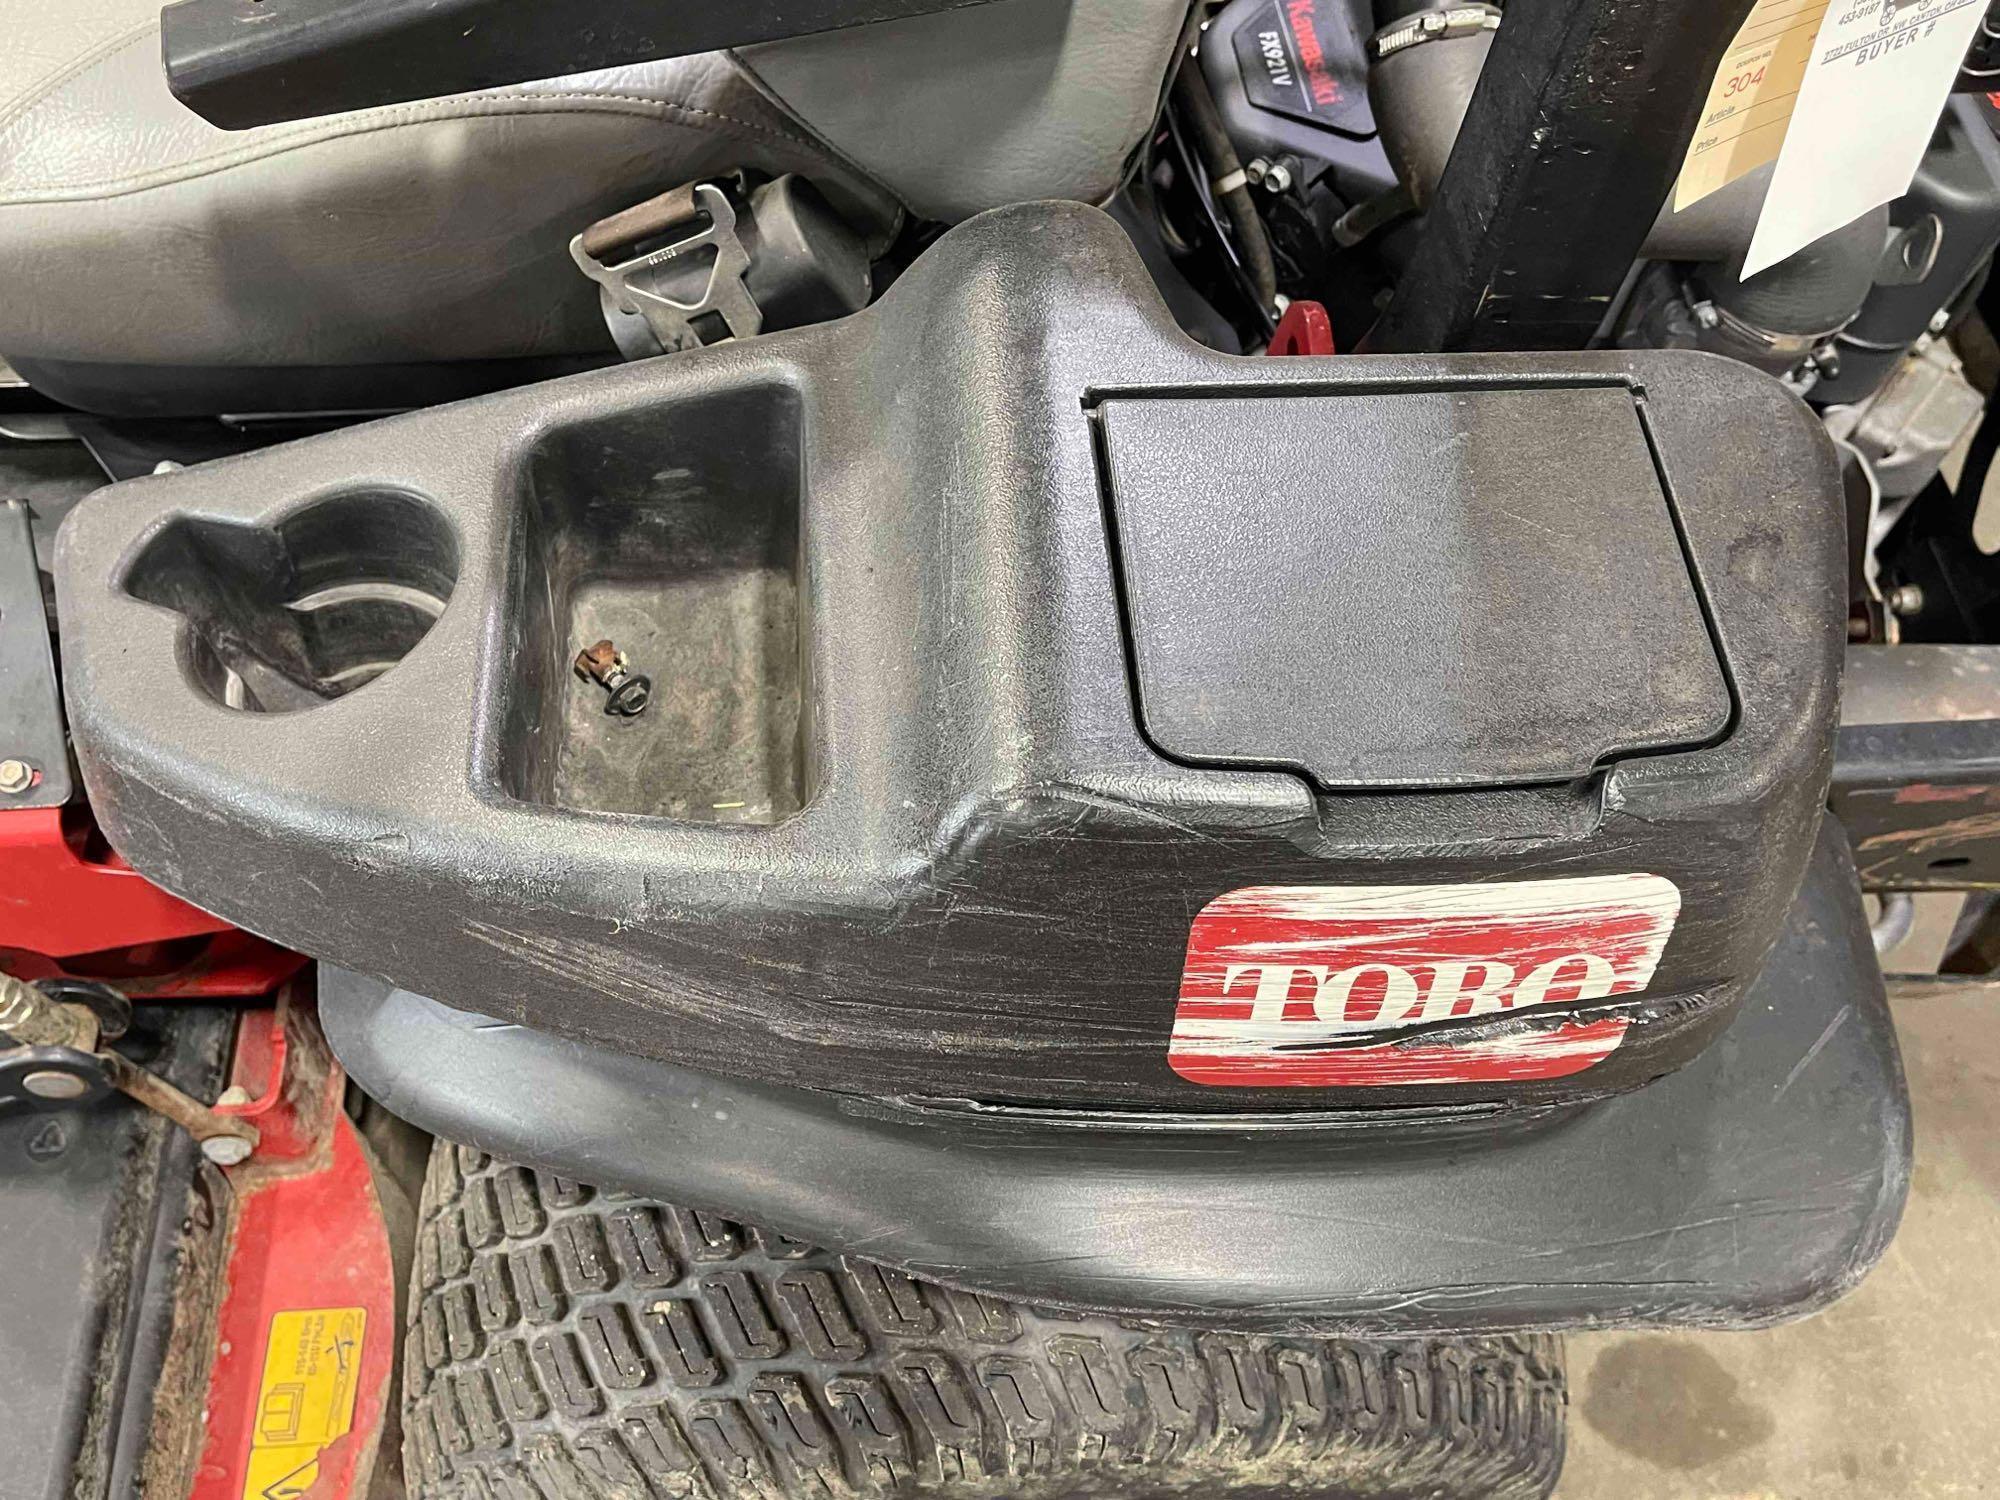 Toro Z Master riding mower, 60 inch, with vacuum bagger 1,691 hrs, runs